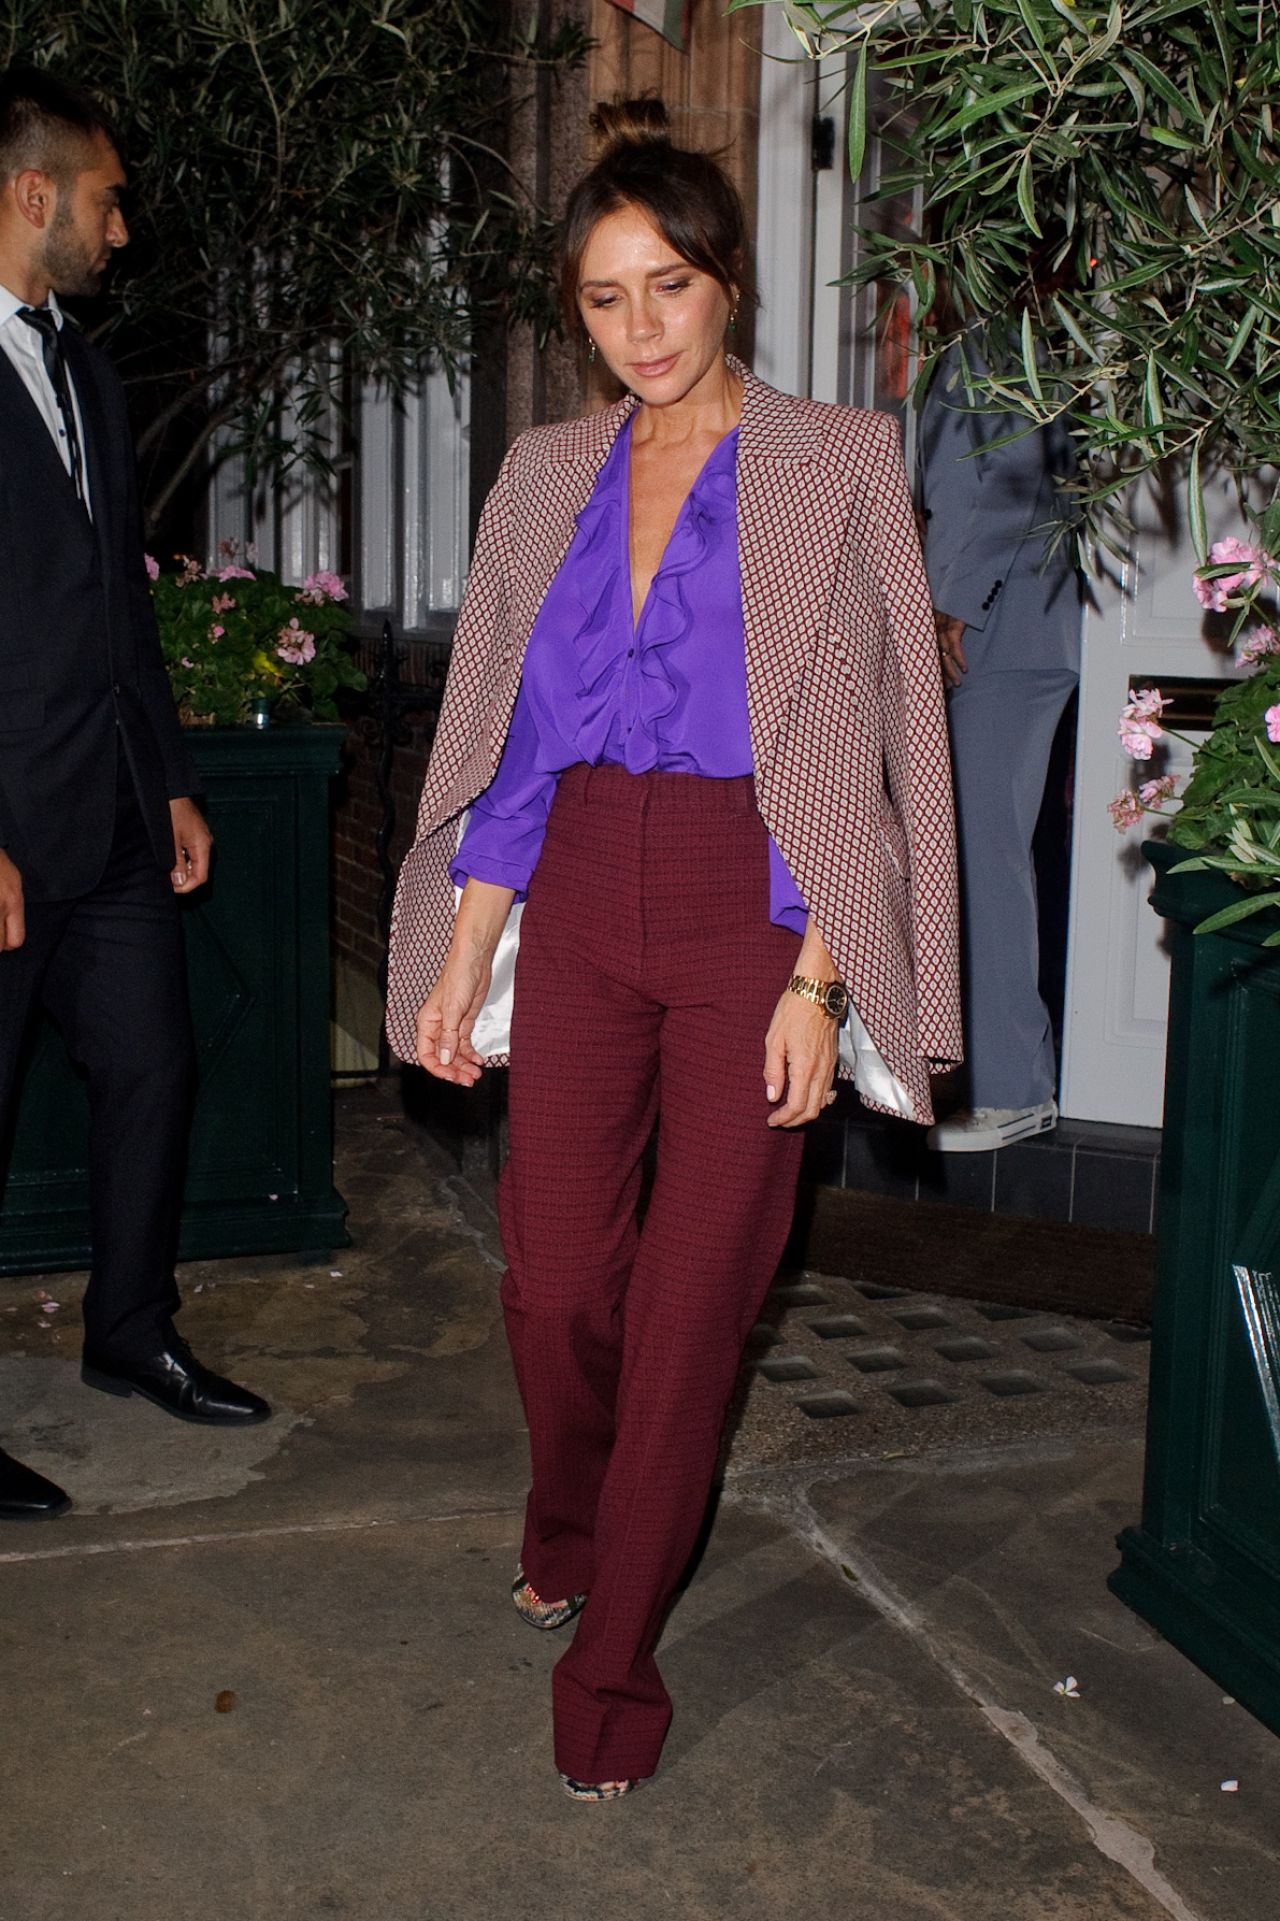 Victoria Beckham With David Beckham at a Private Dinner in London 09/15 ...